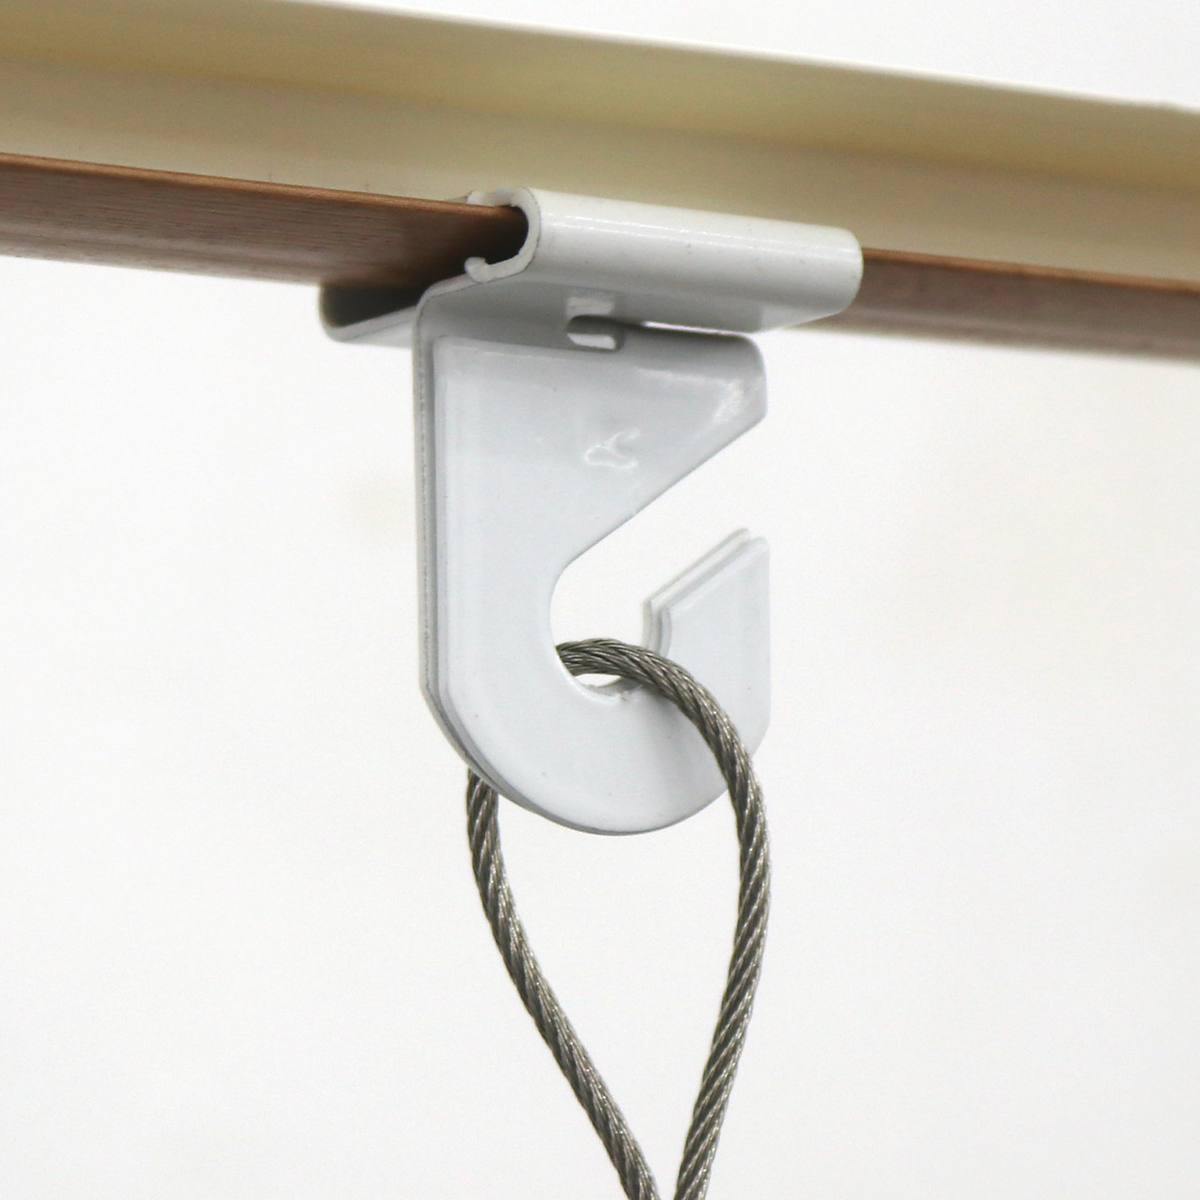 Sturdy Ceiling Grid Hooks - Holds up to 15 lbs - Drop